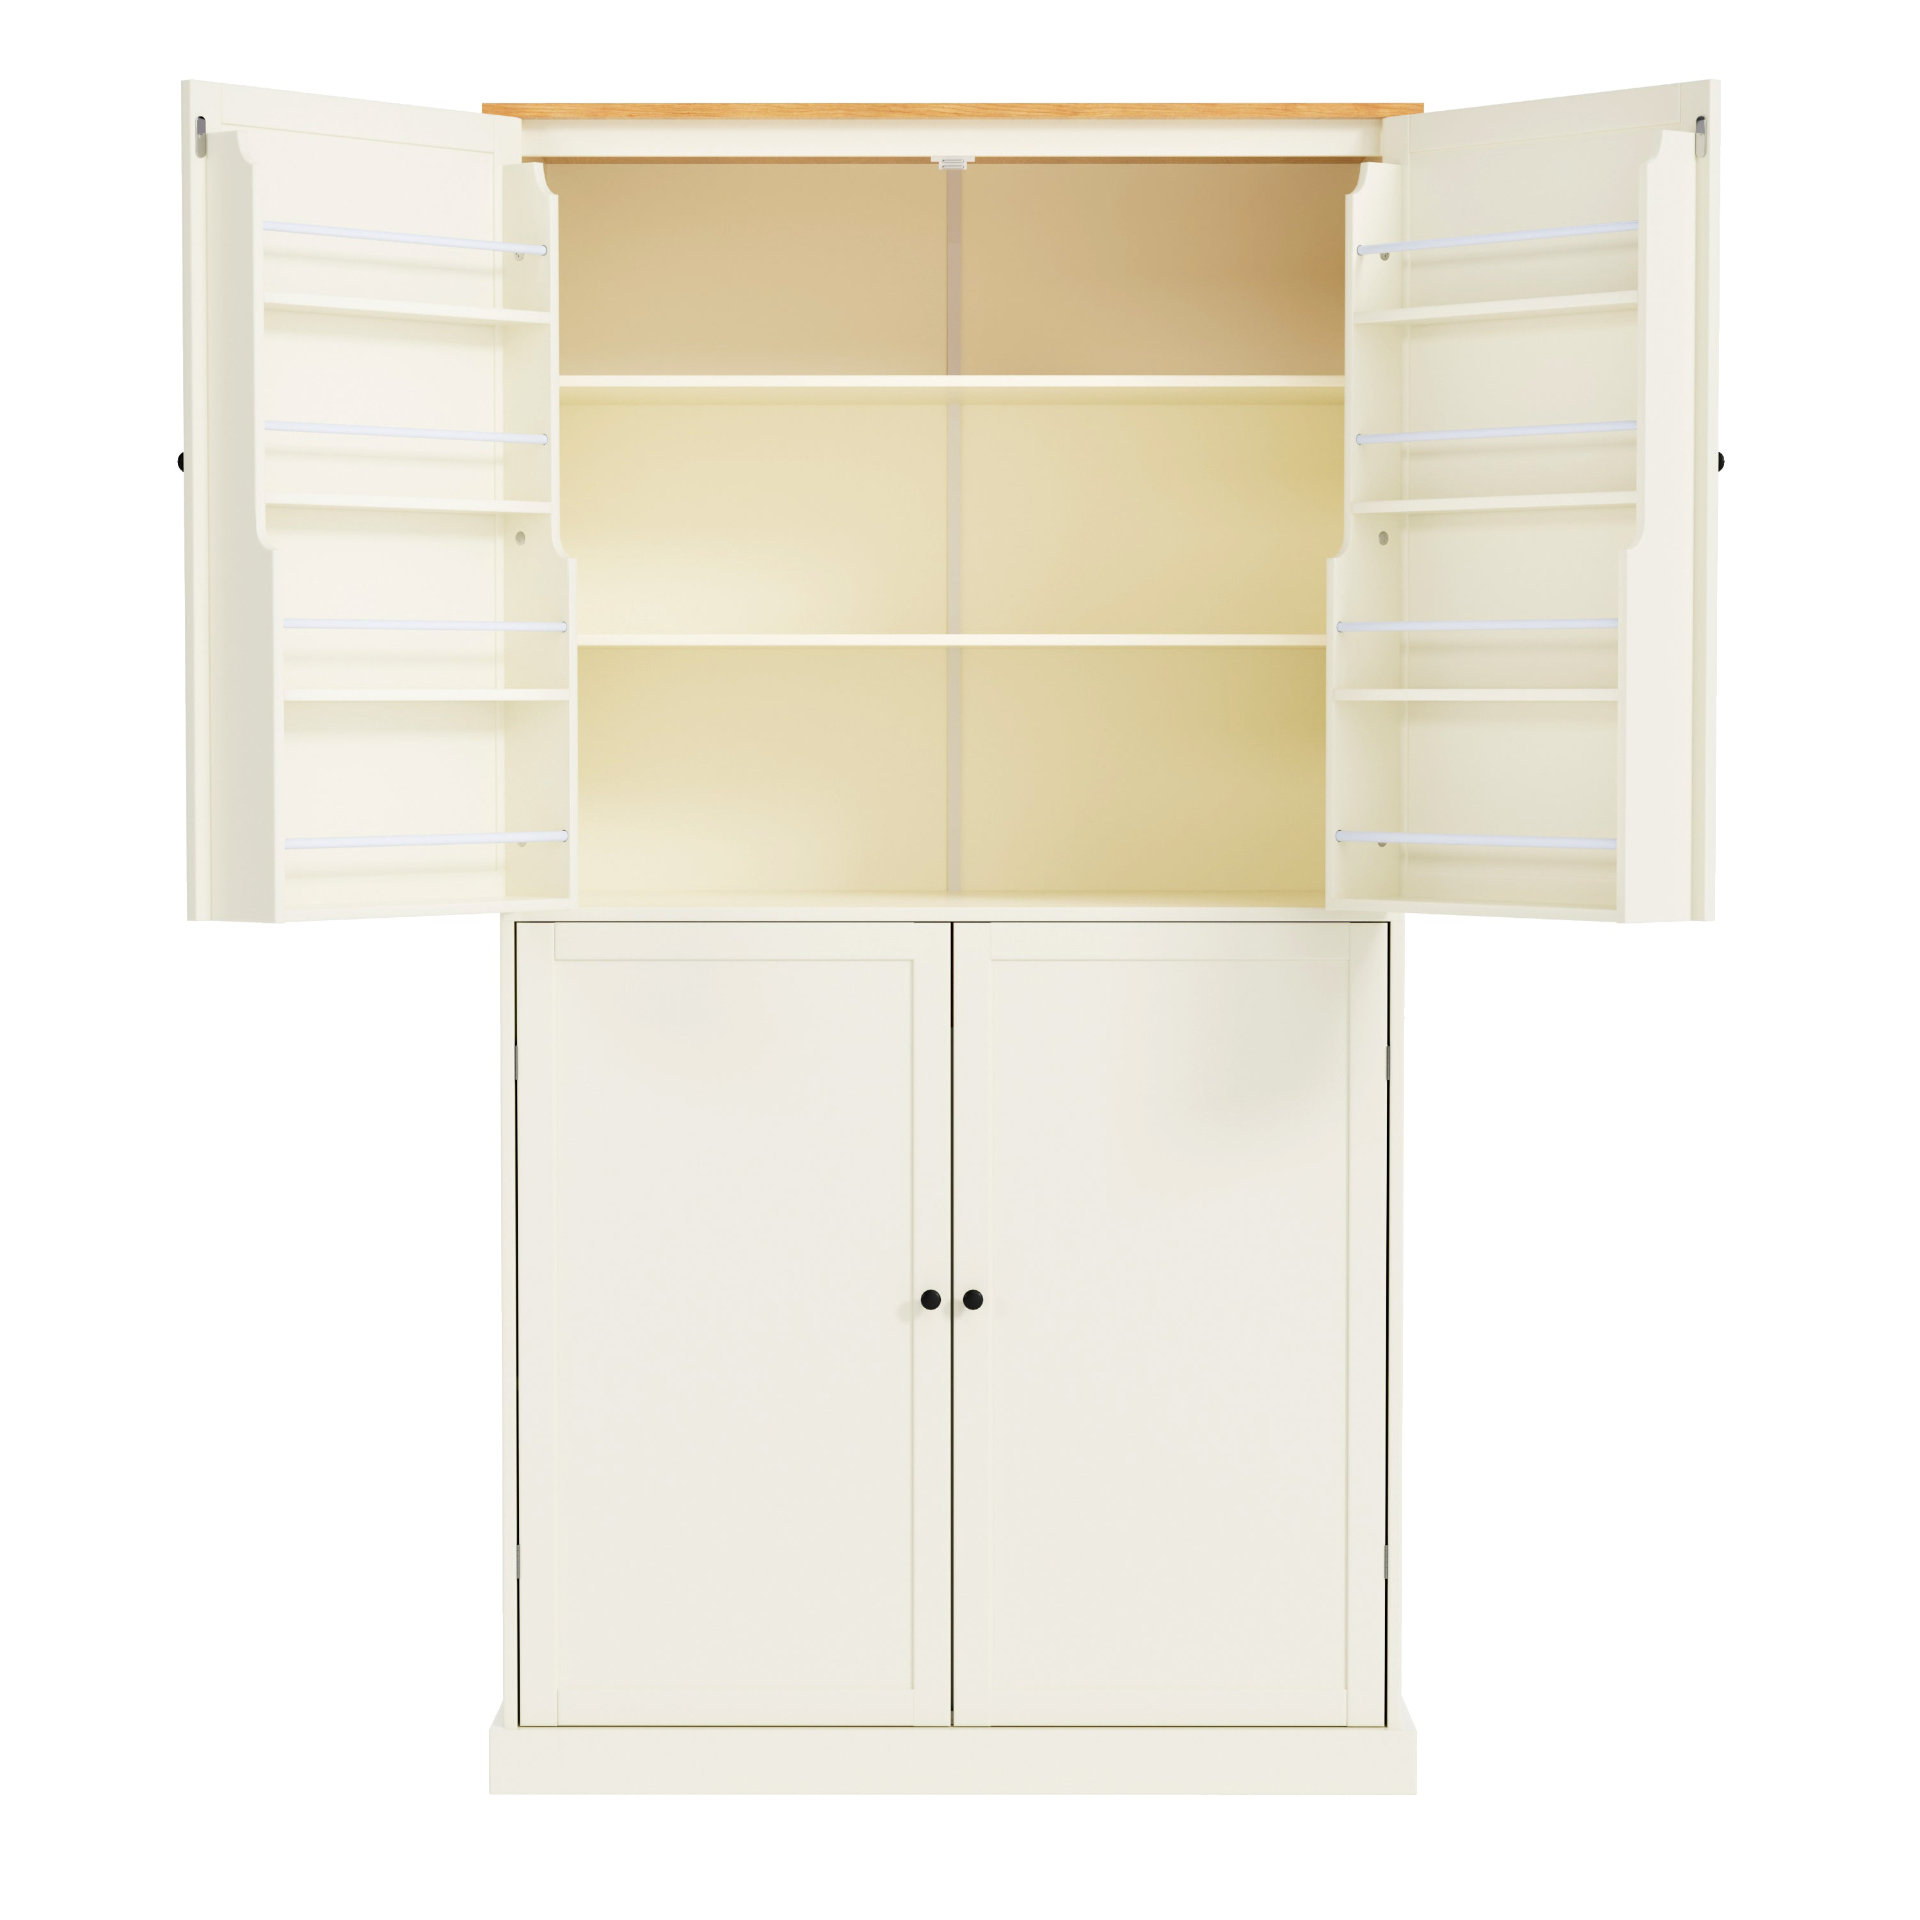 40.2x20x71.3inch High Freestanding Kitchen Pantry Large Cupboard Storage Cabinet with 2 Drawers, 2 Adjustable Shelves, 8 Door Shelves for Kitchen, Dining Room,Cream, Goodies N Stuff